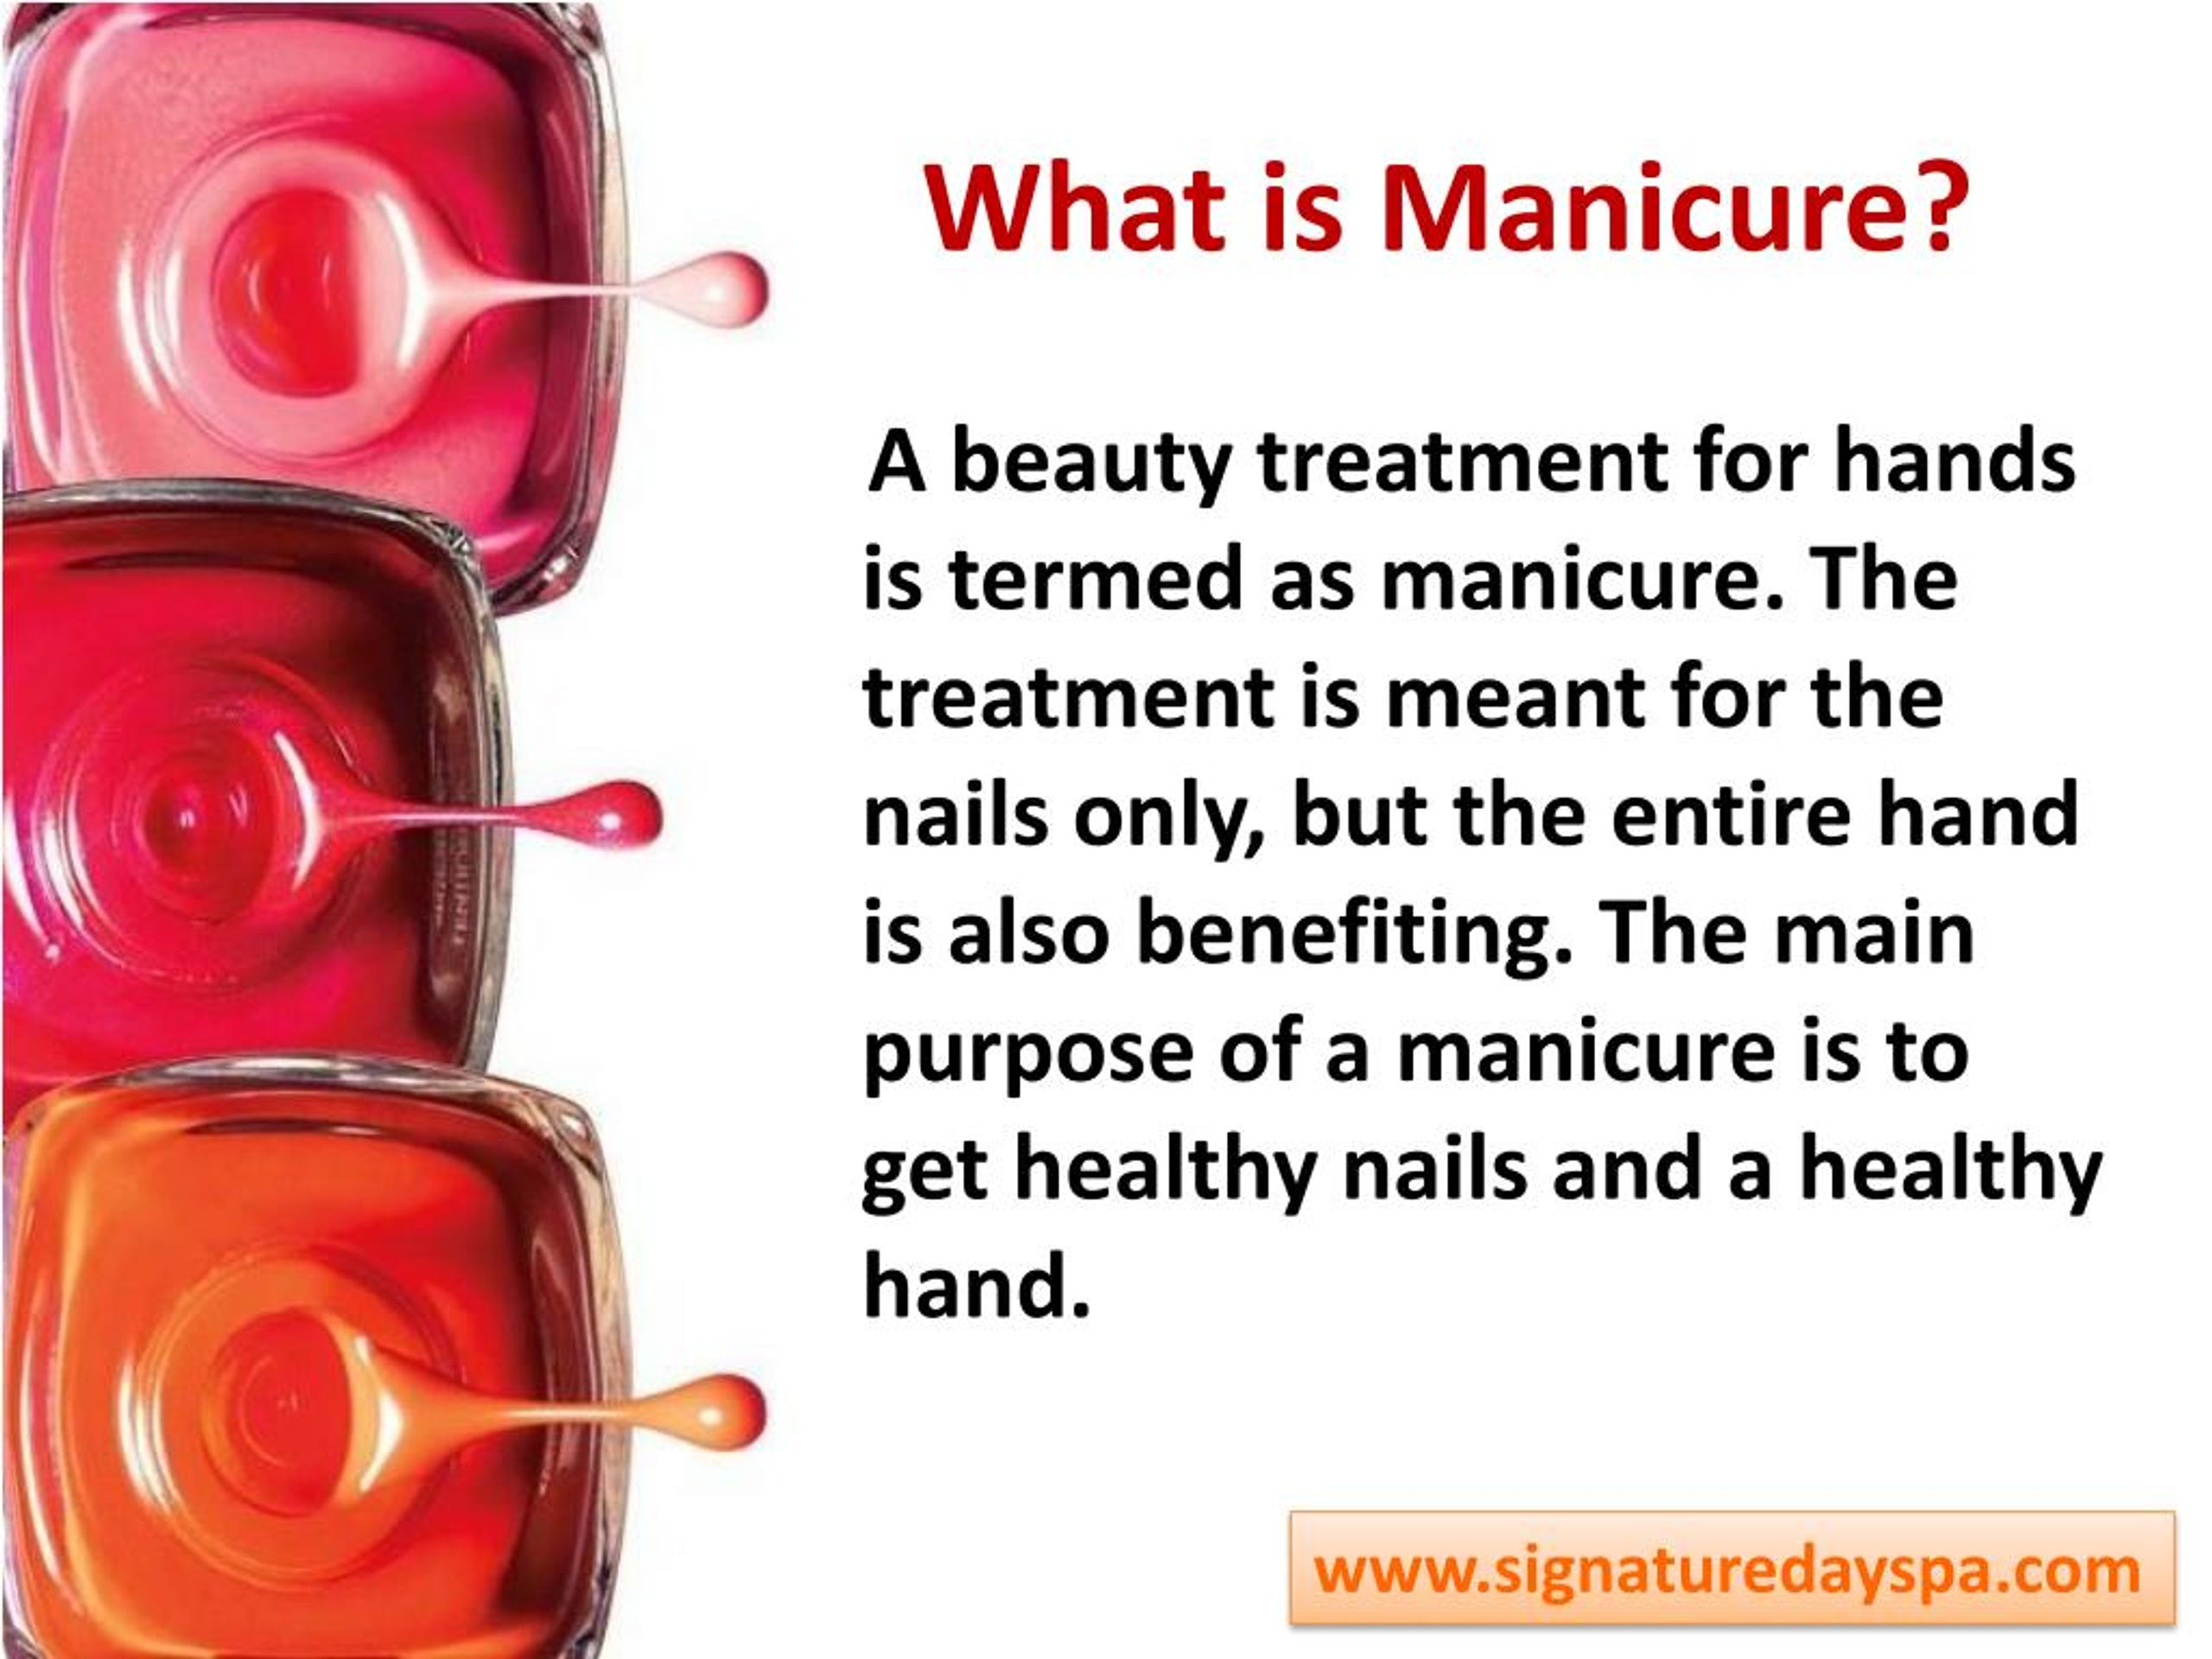 What is the main purpose of pedicure?